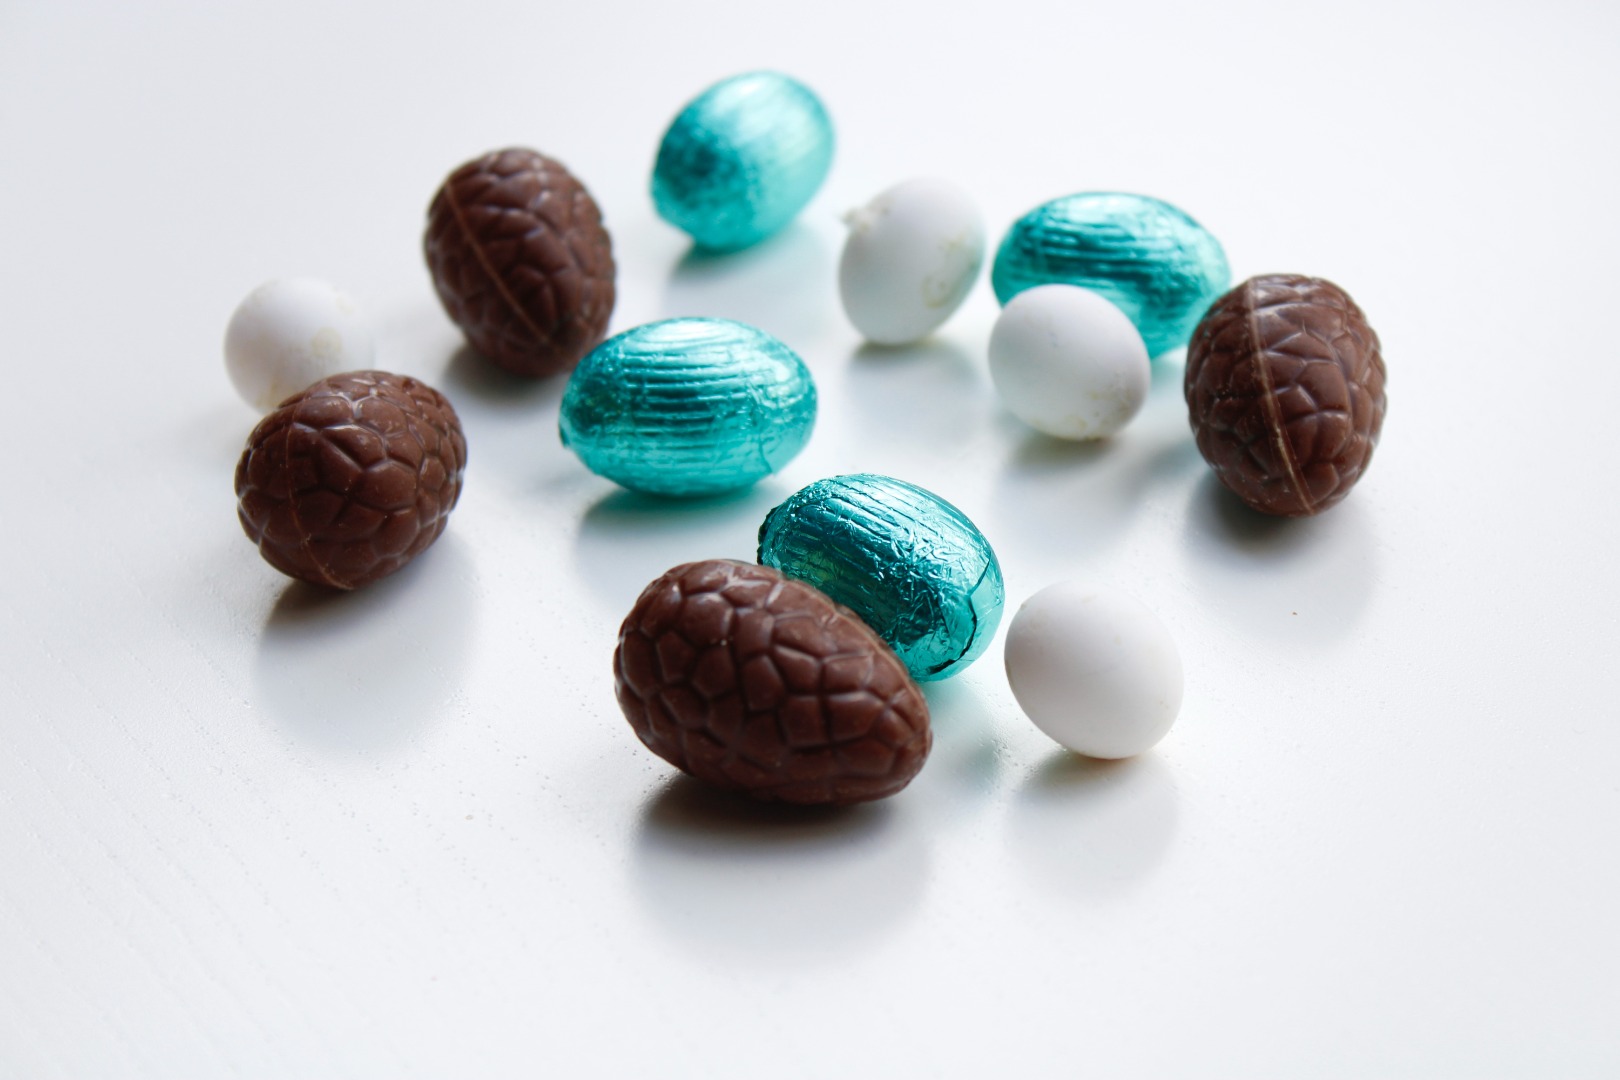 Blue, white and unwrapped Easter eggs against a white background. Photo: Unsplash